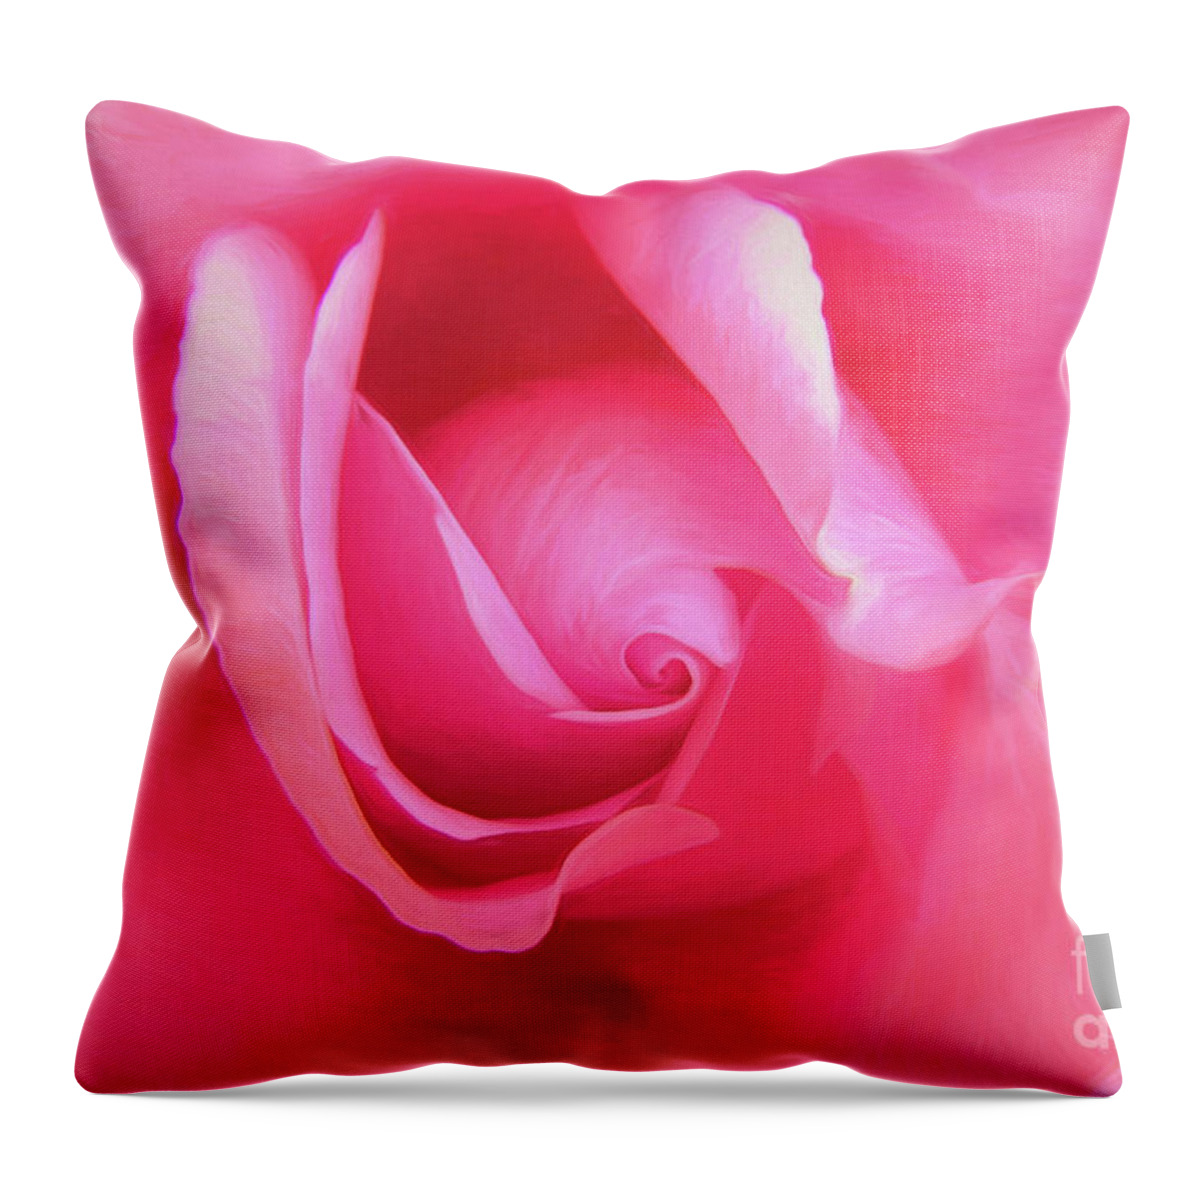 Love Pink Throw Pillow featuring the photograph Love Pink by Scott Cameron